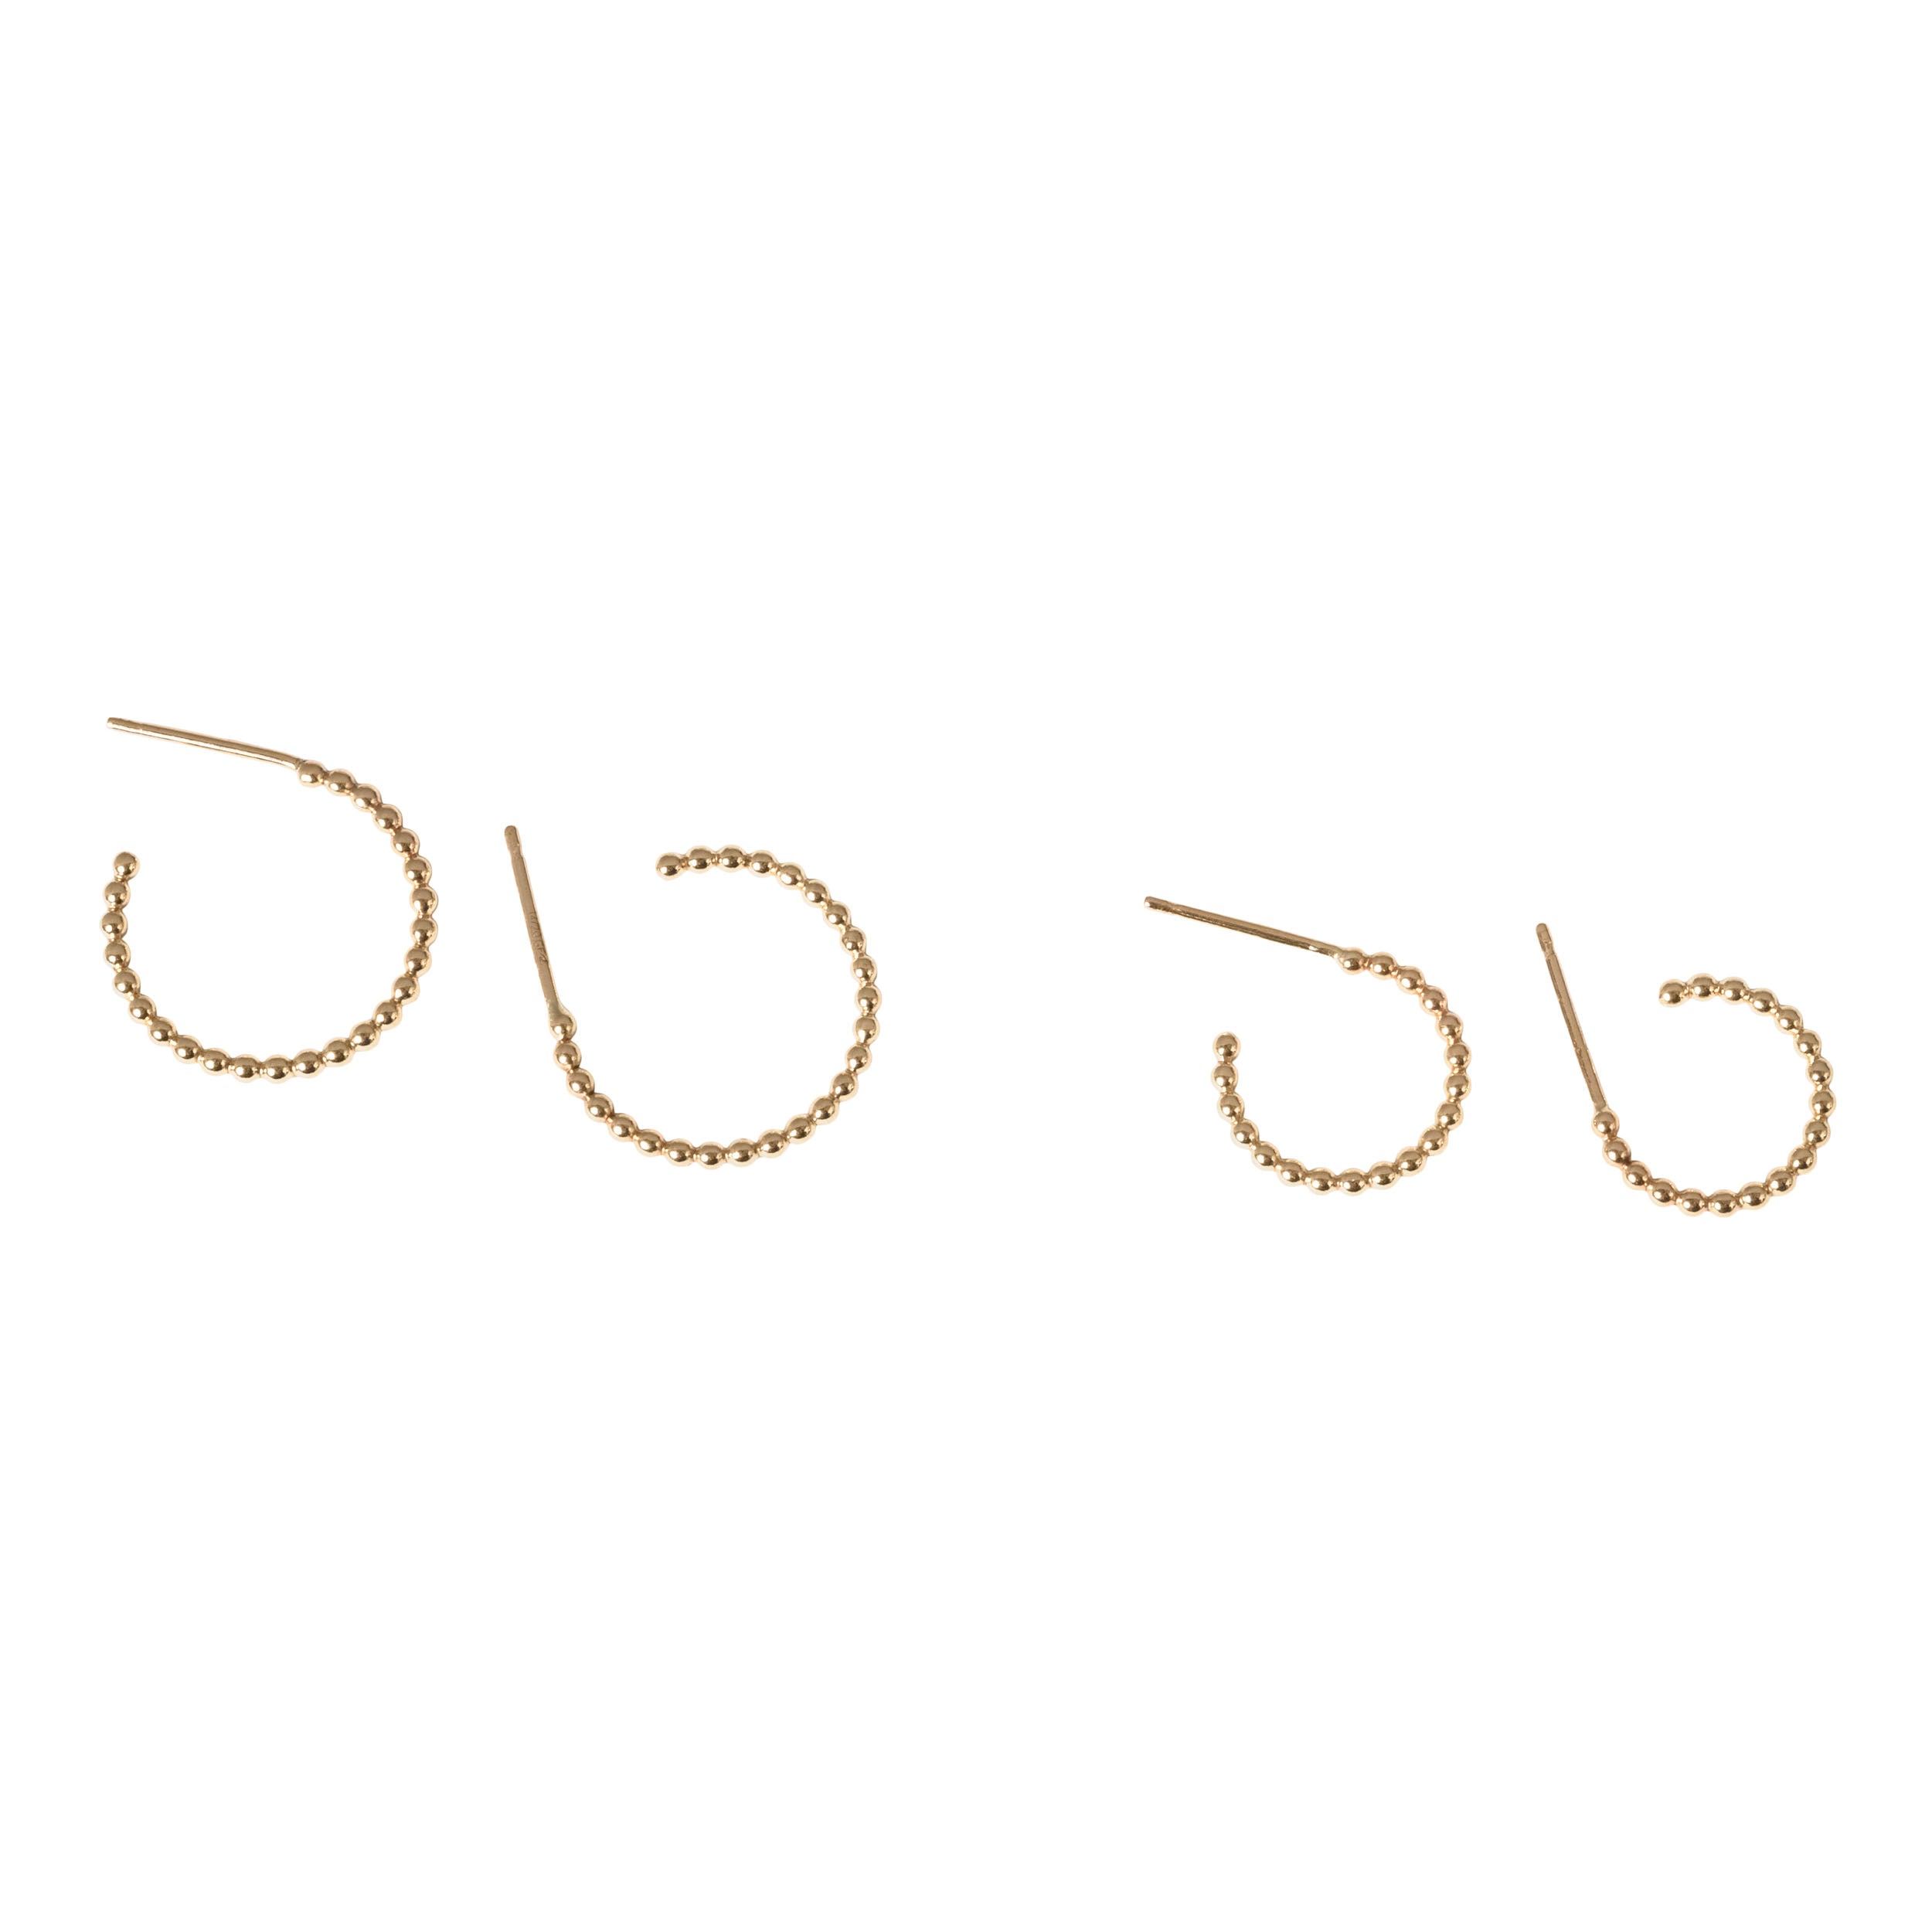 Bubble Bead Hoops in Two Sizes